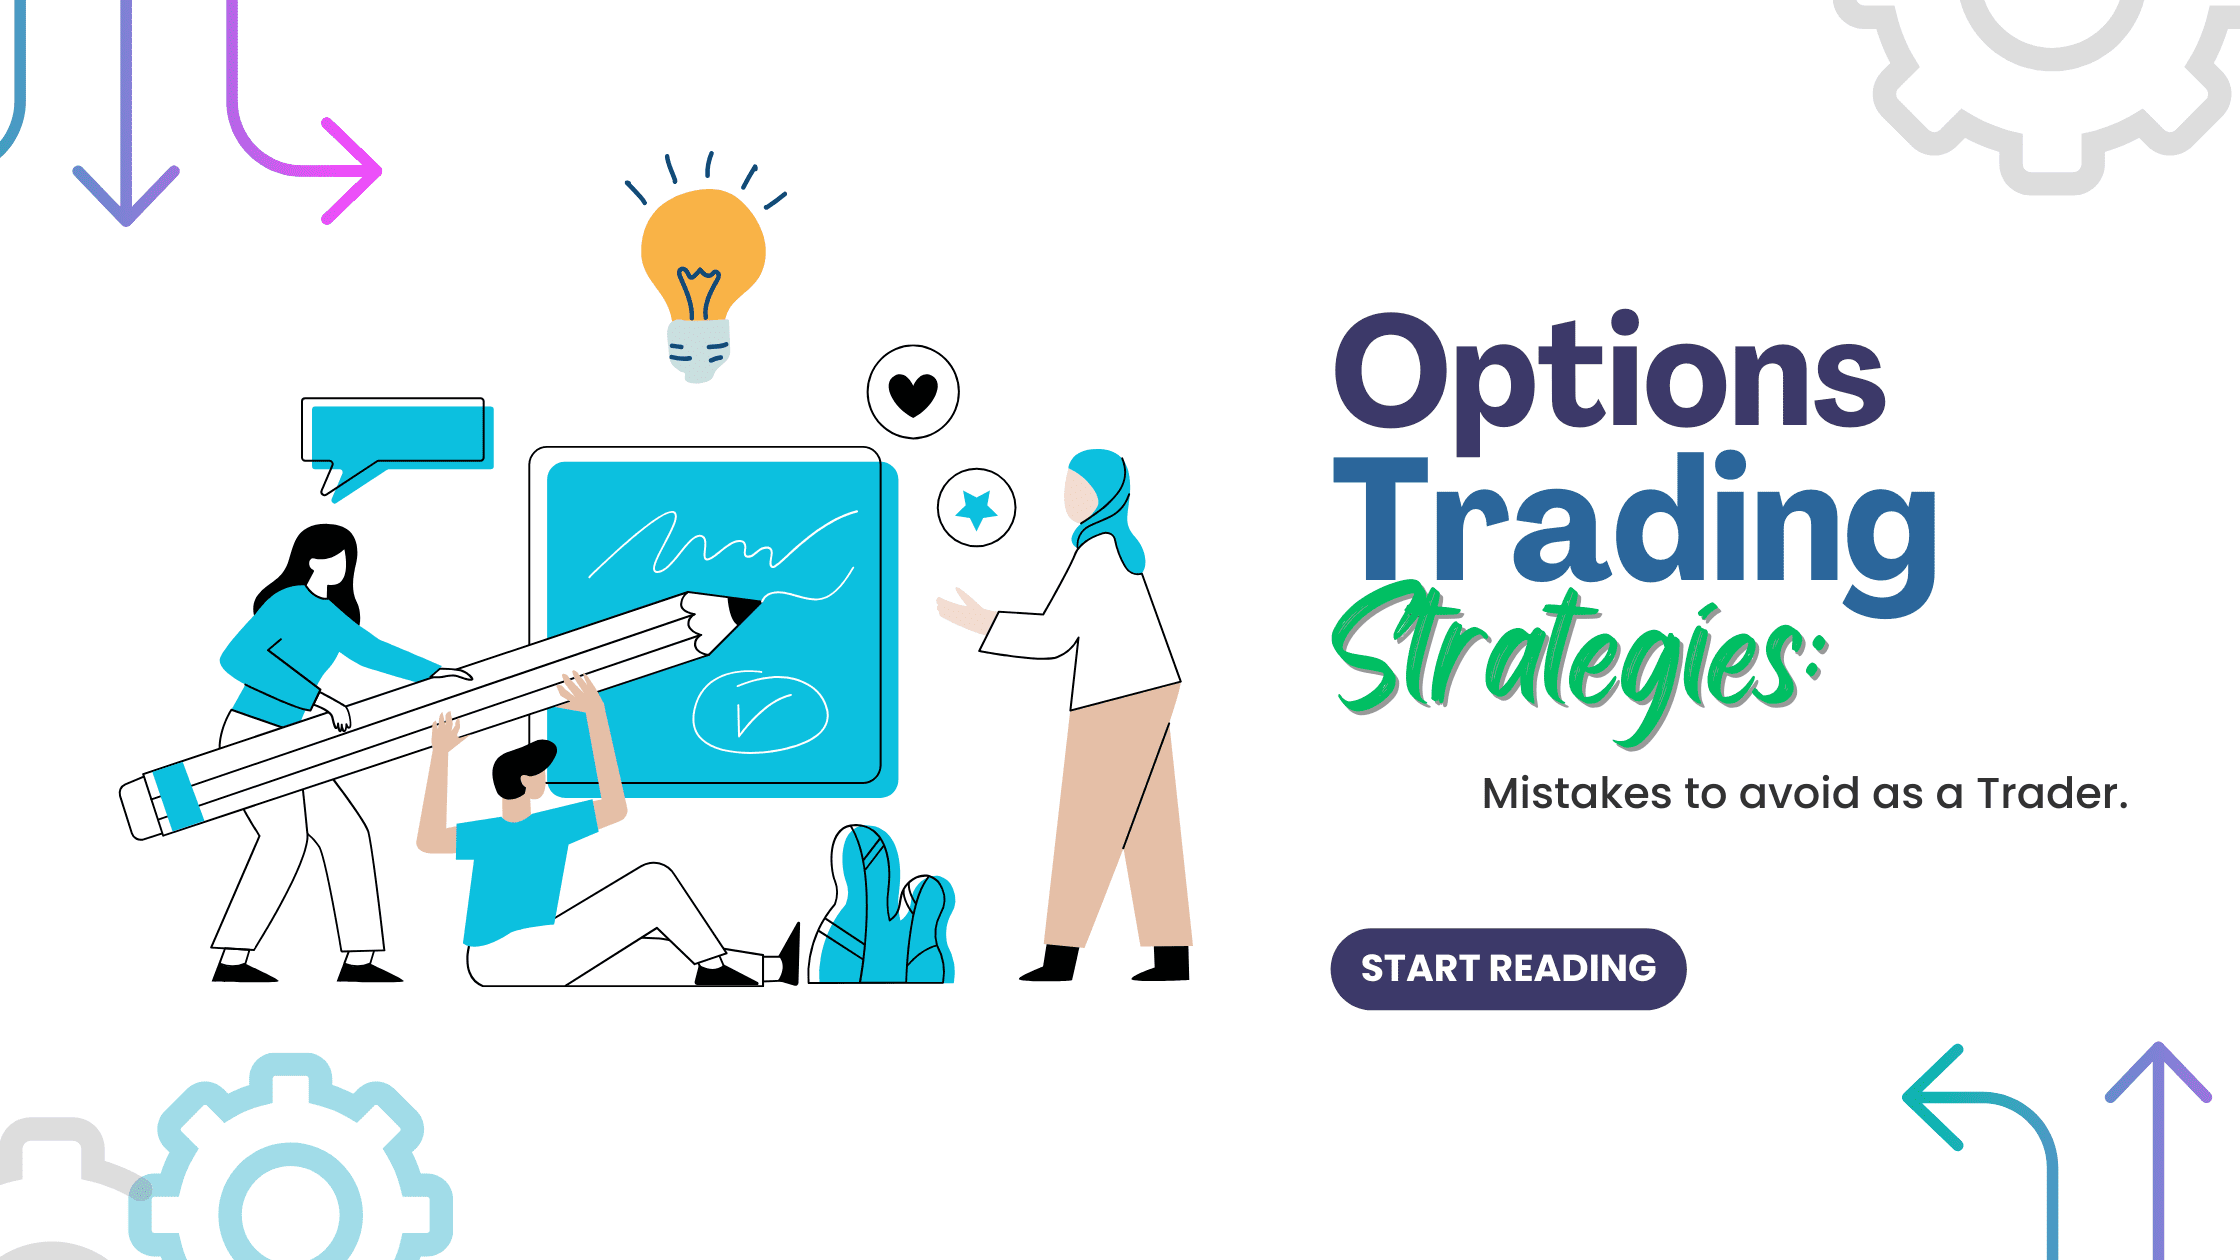 Options Trading Strategies Mistakes to avoid as a Trader